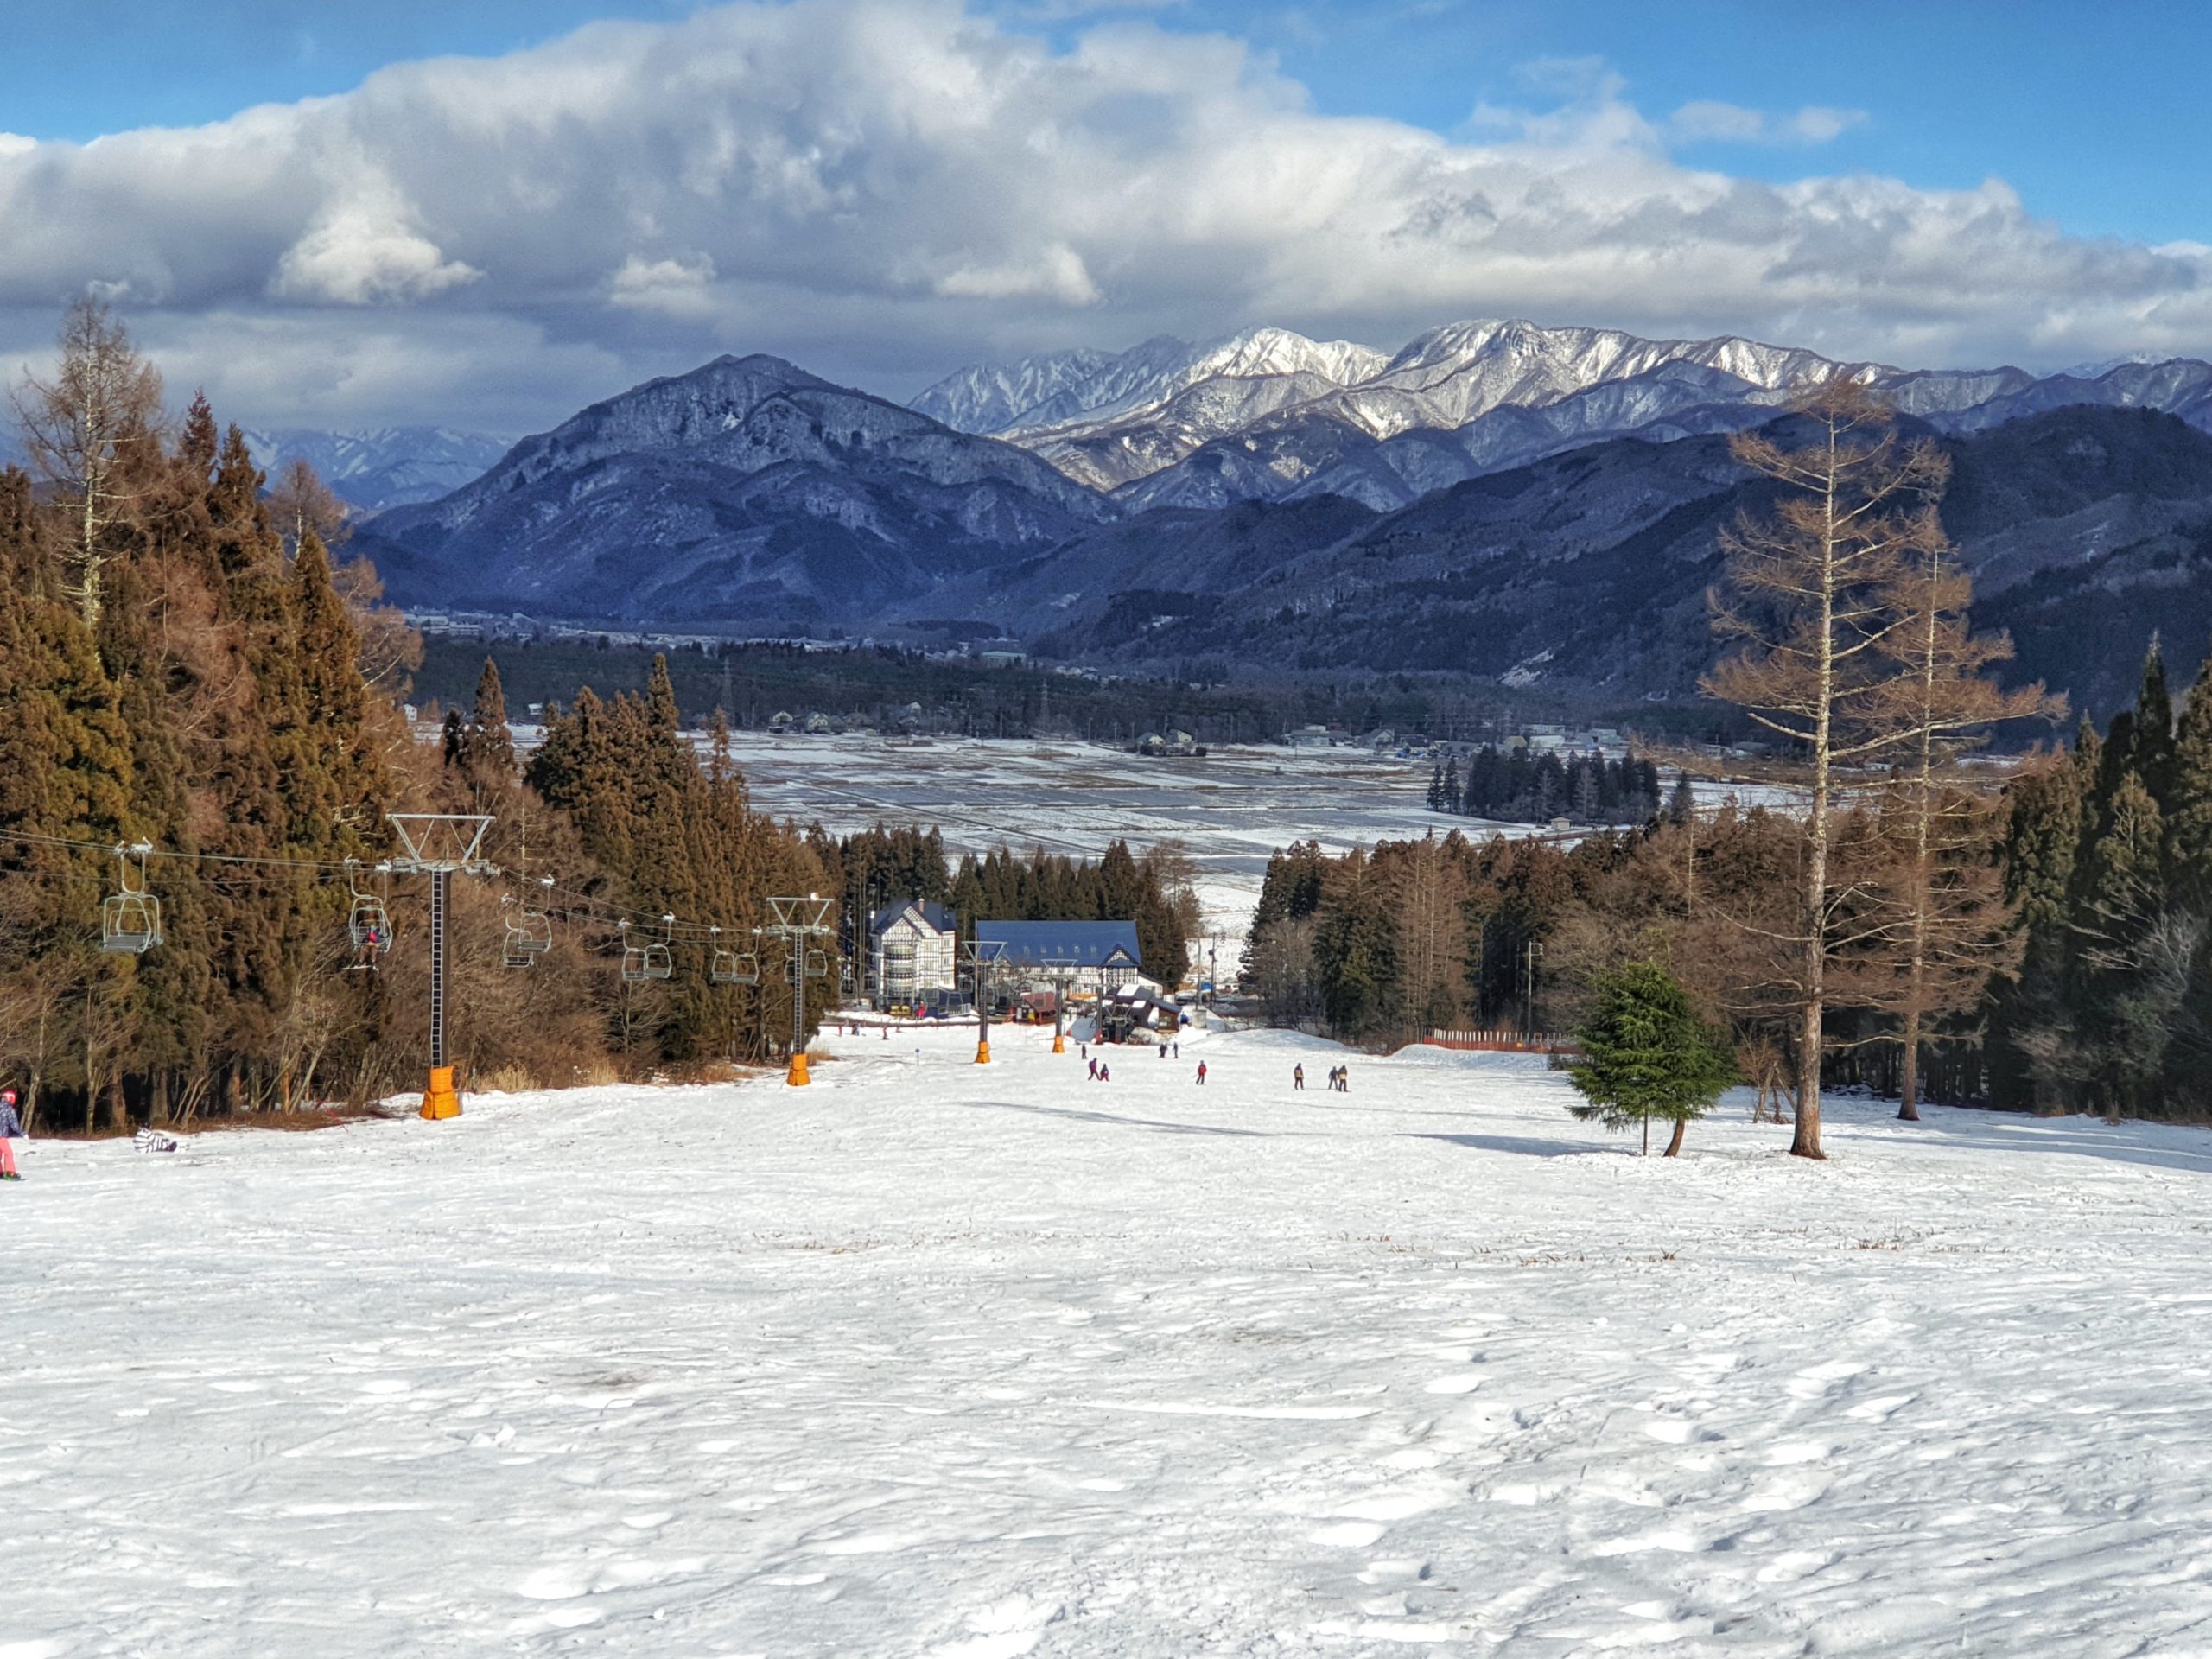 Nagano under snow with mountains in the background